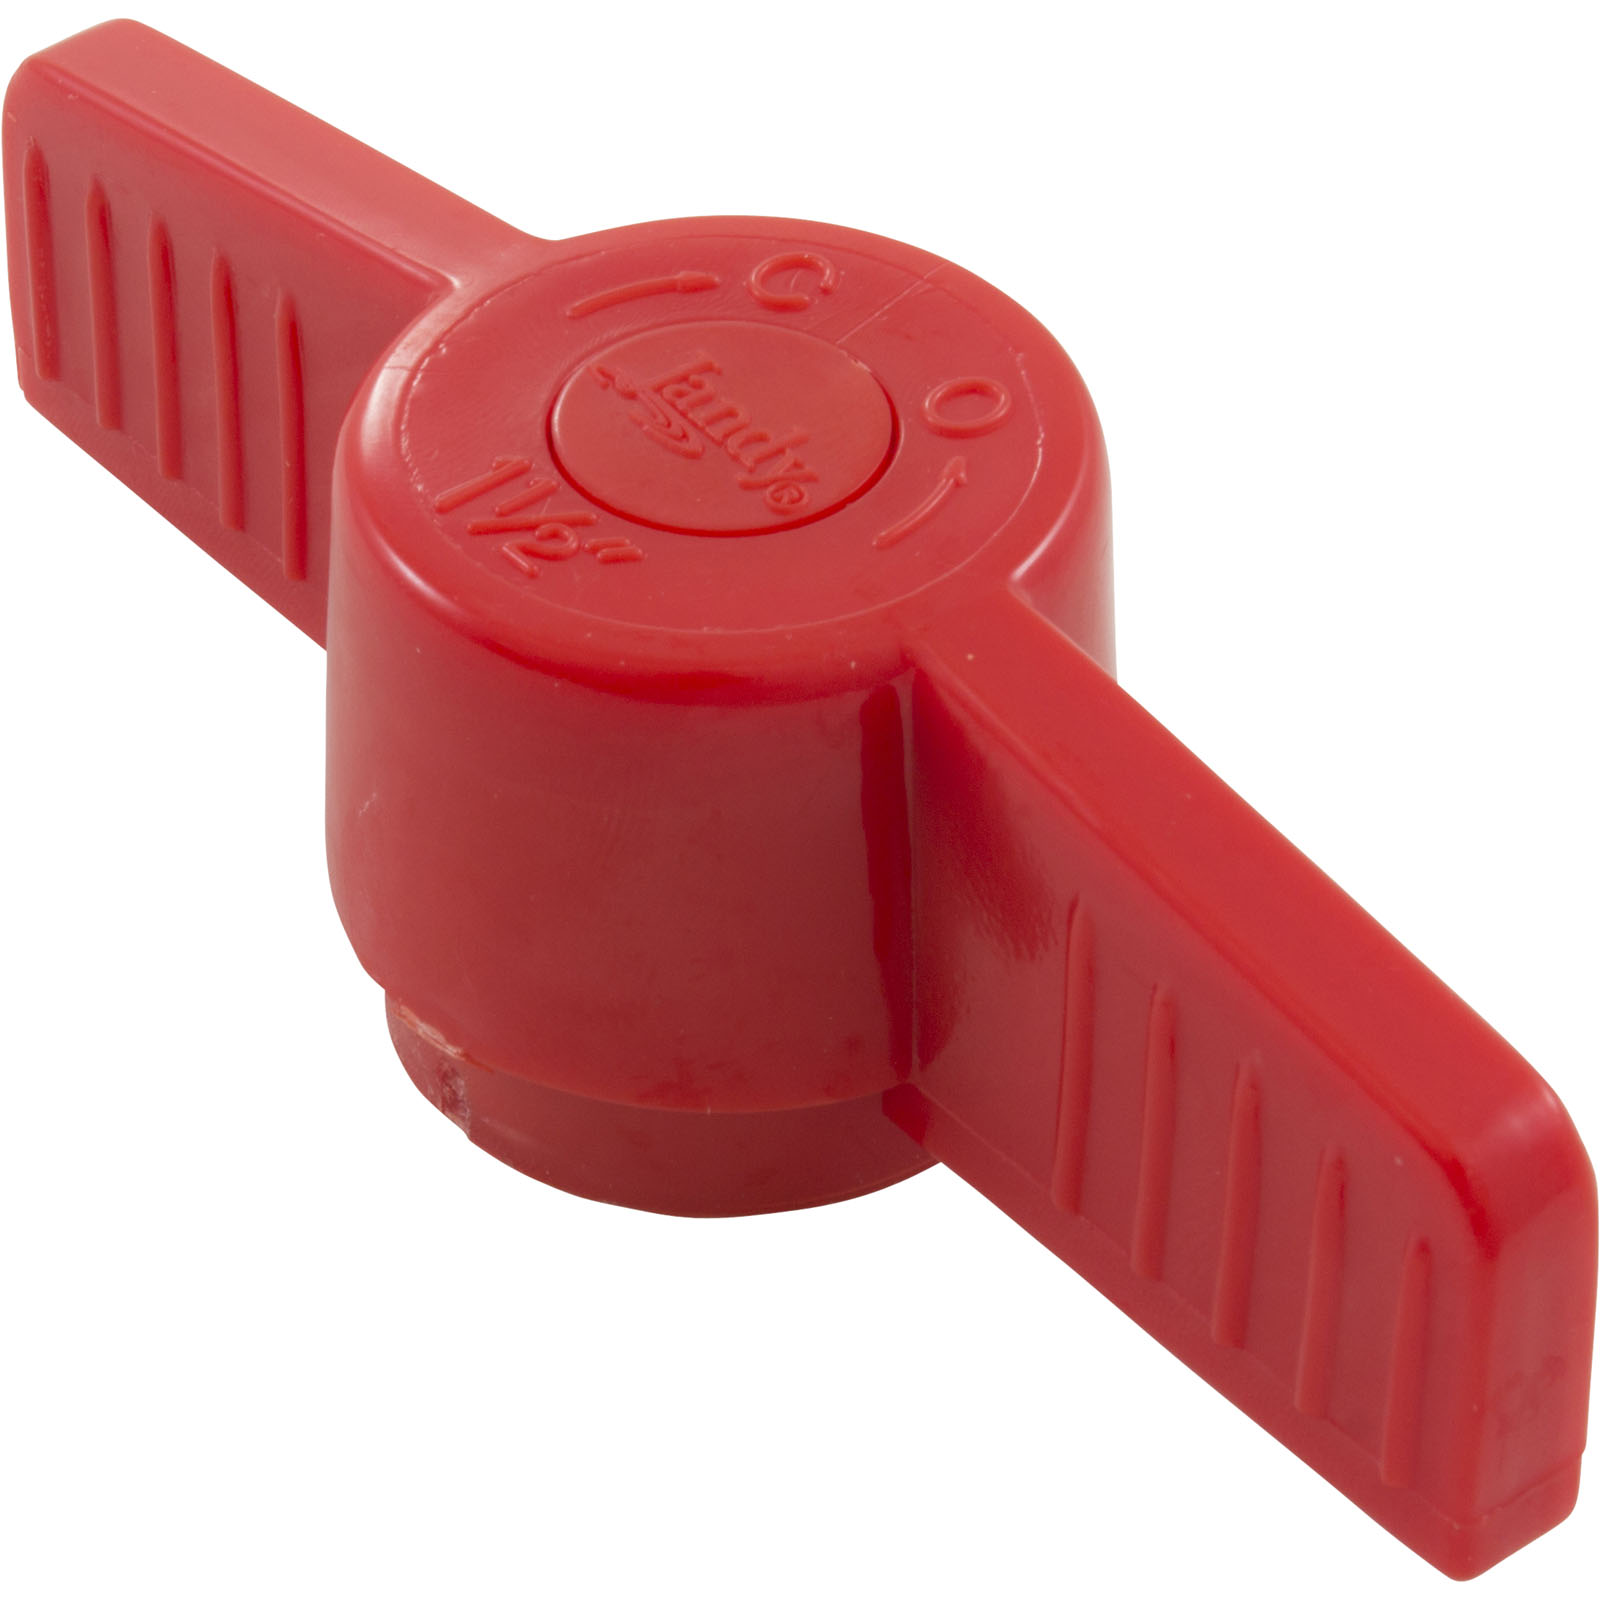 Jandy Pro Series Handle, Non-Union Ball Valve 1 1/2", Replacement